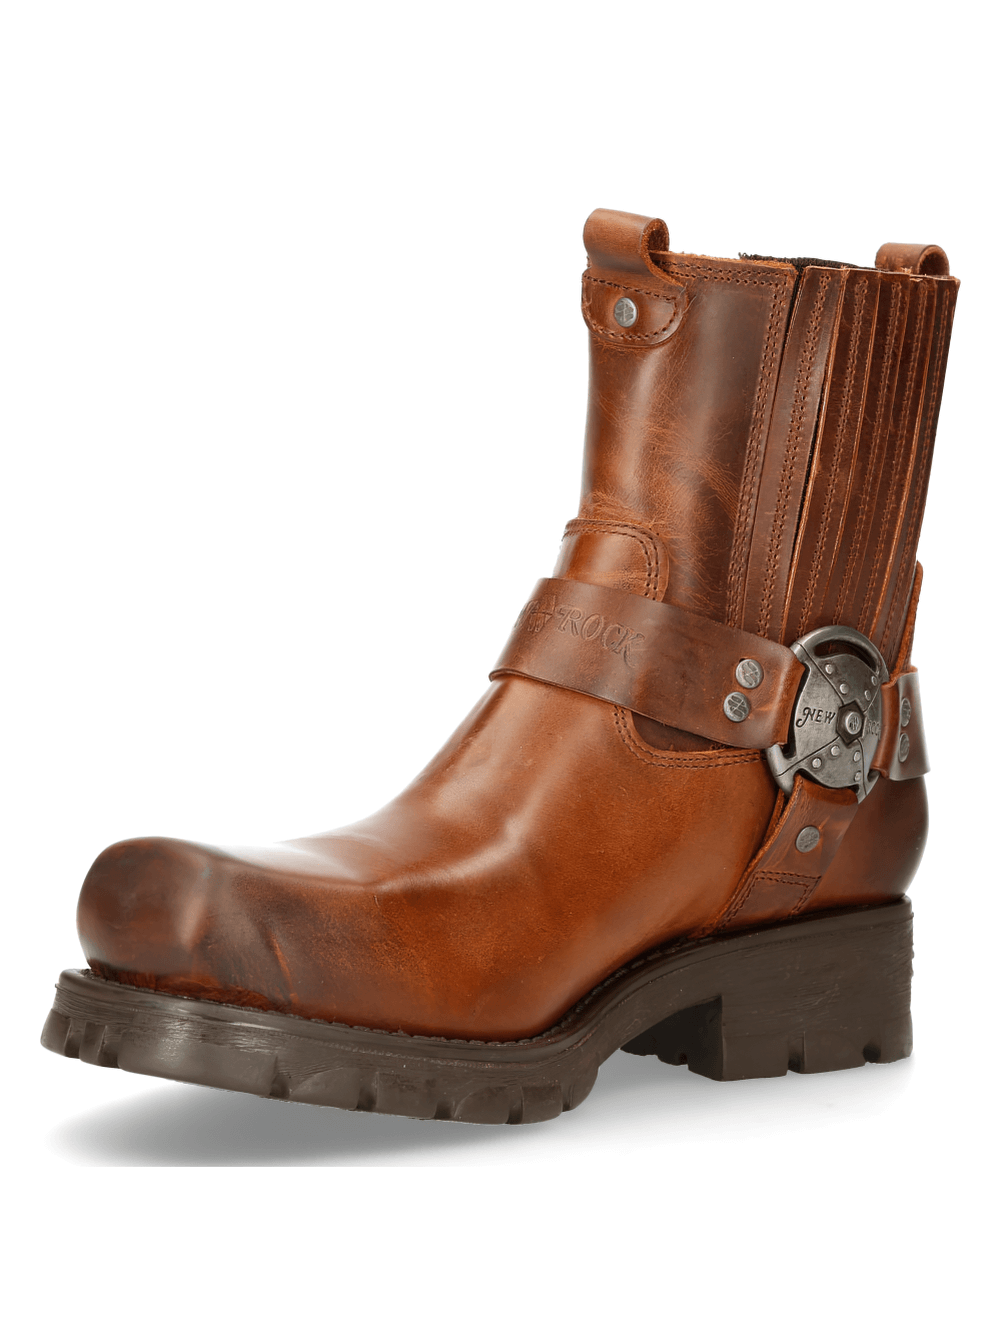 NEW ROCK Elastic Side Panel Rugged Brown Leather Ankle Boots